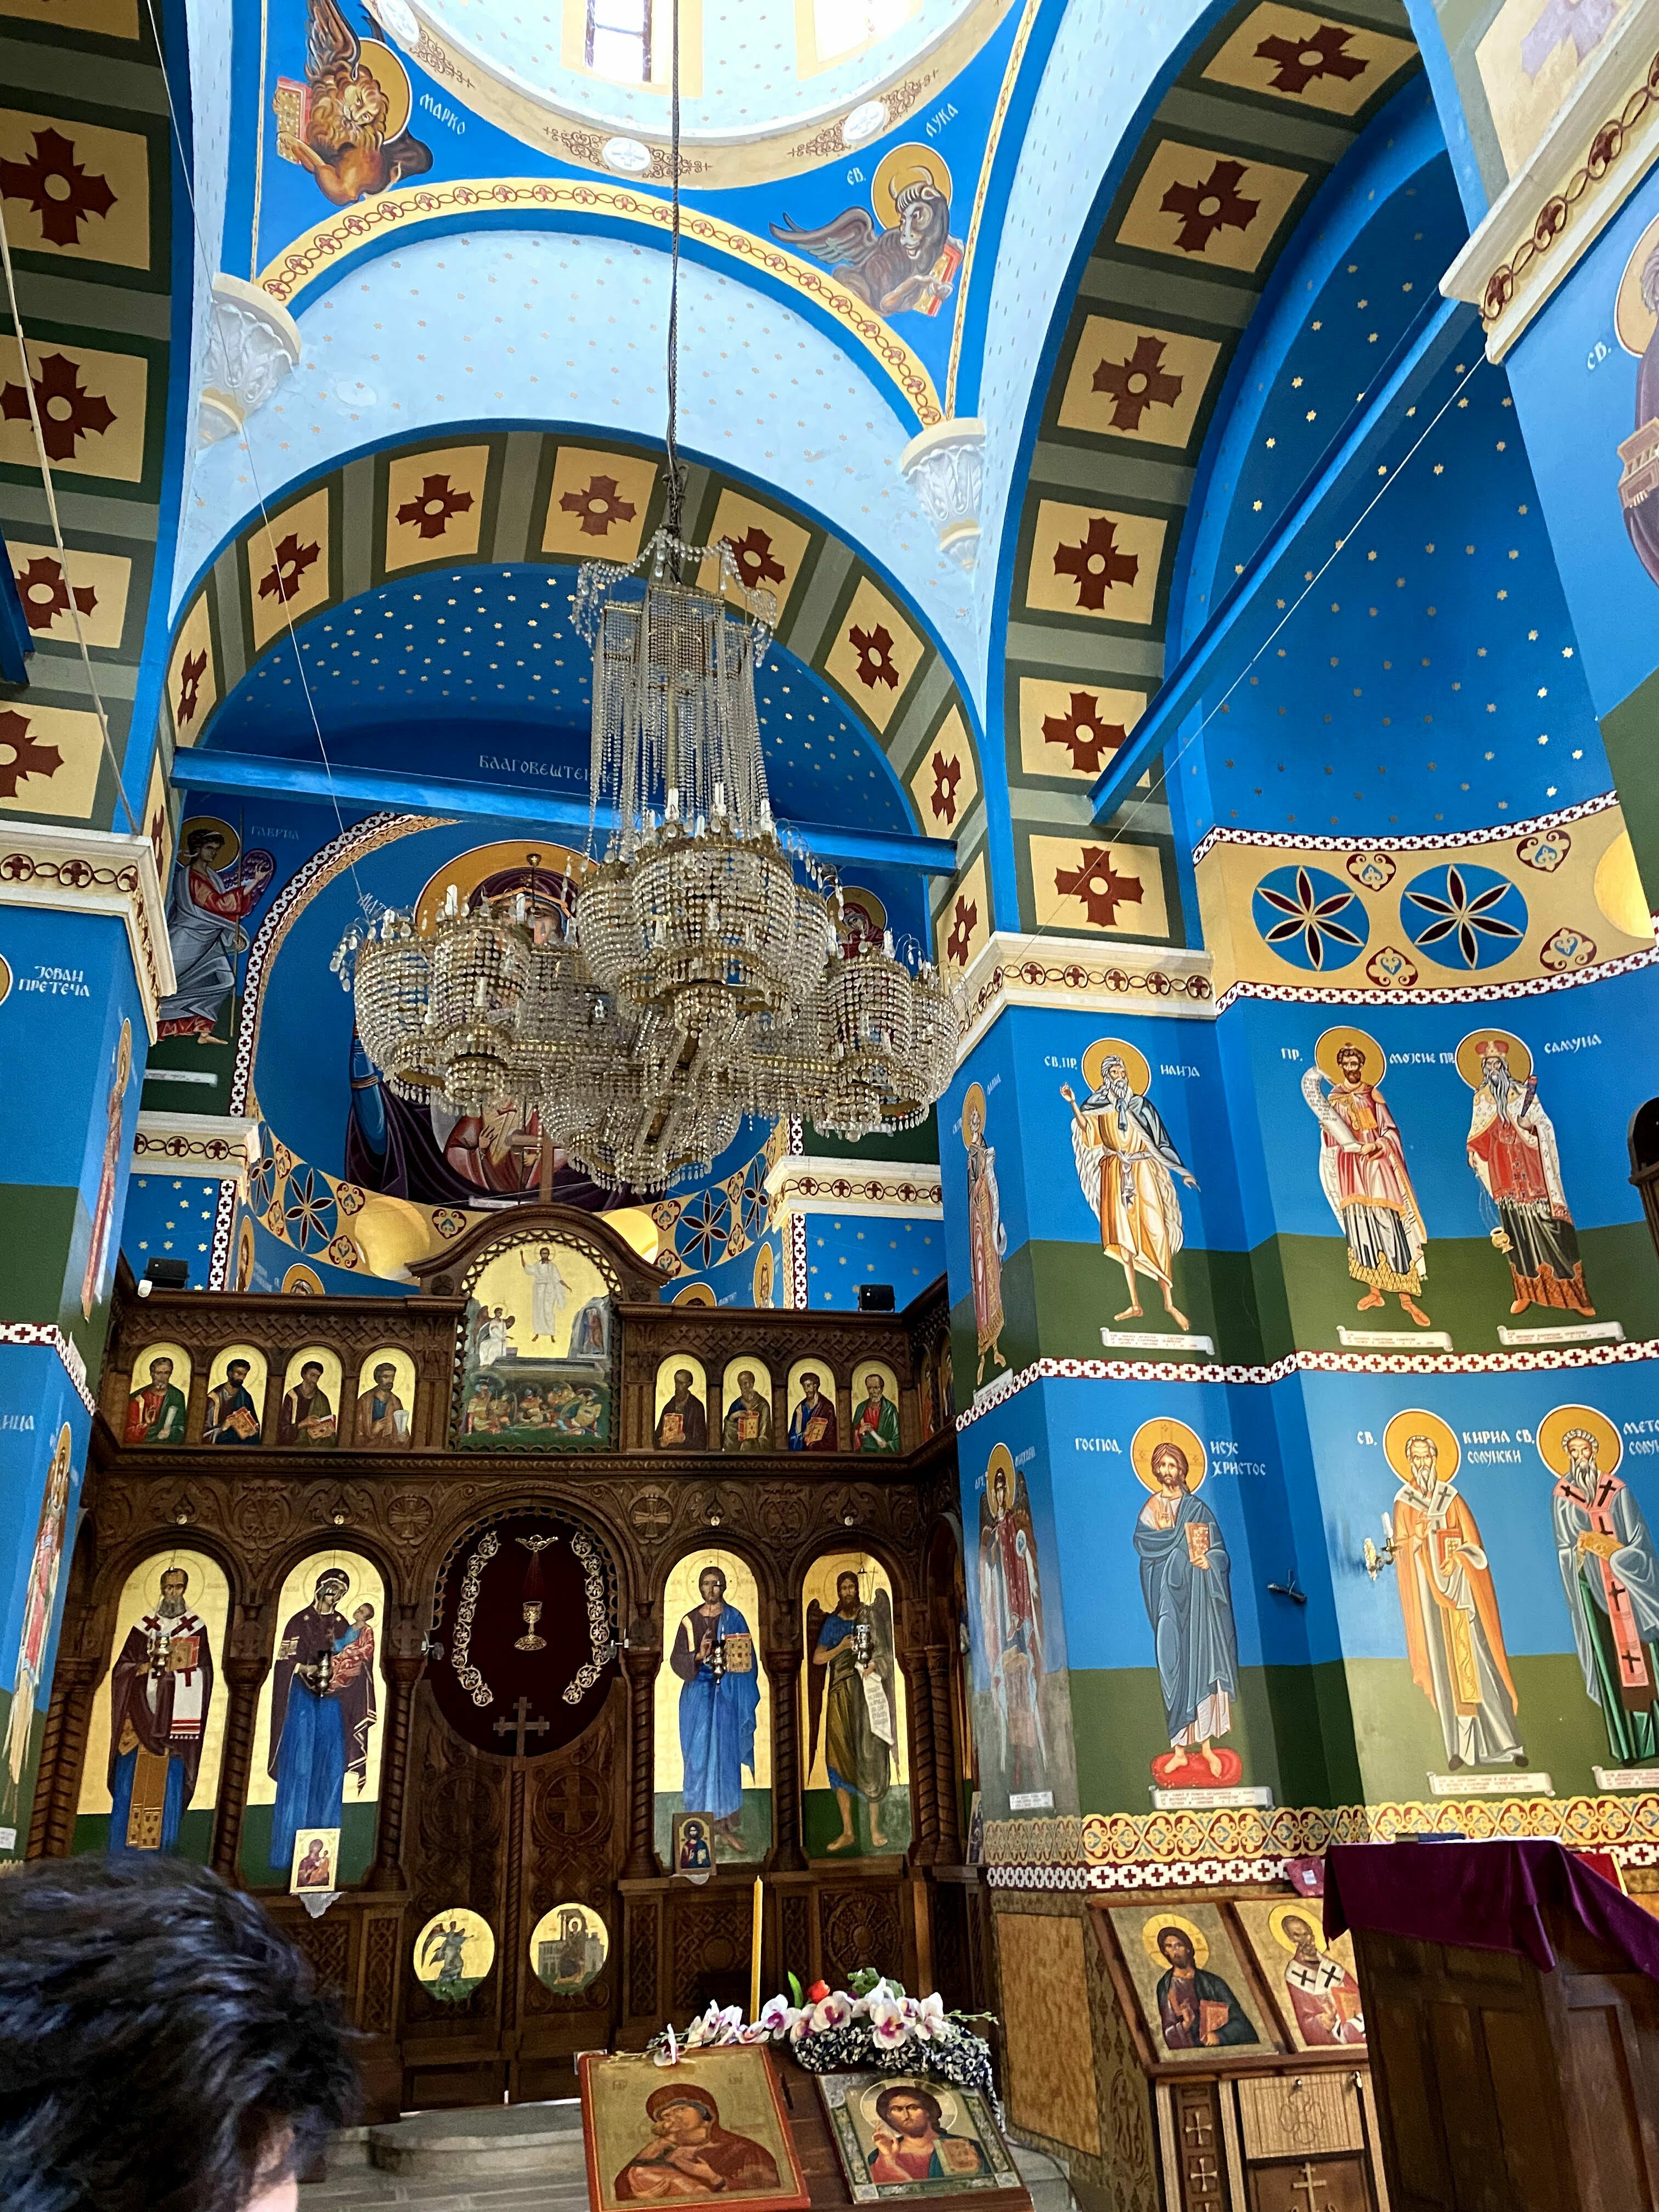 The colorful interior of an orthodox church